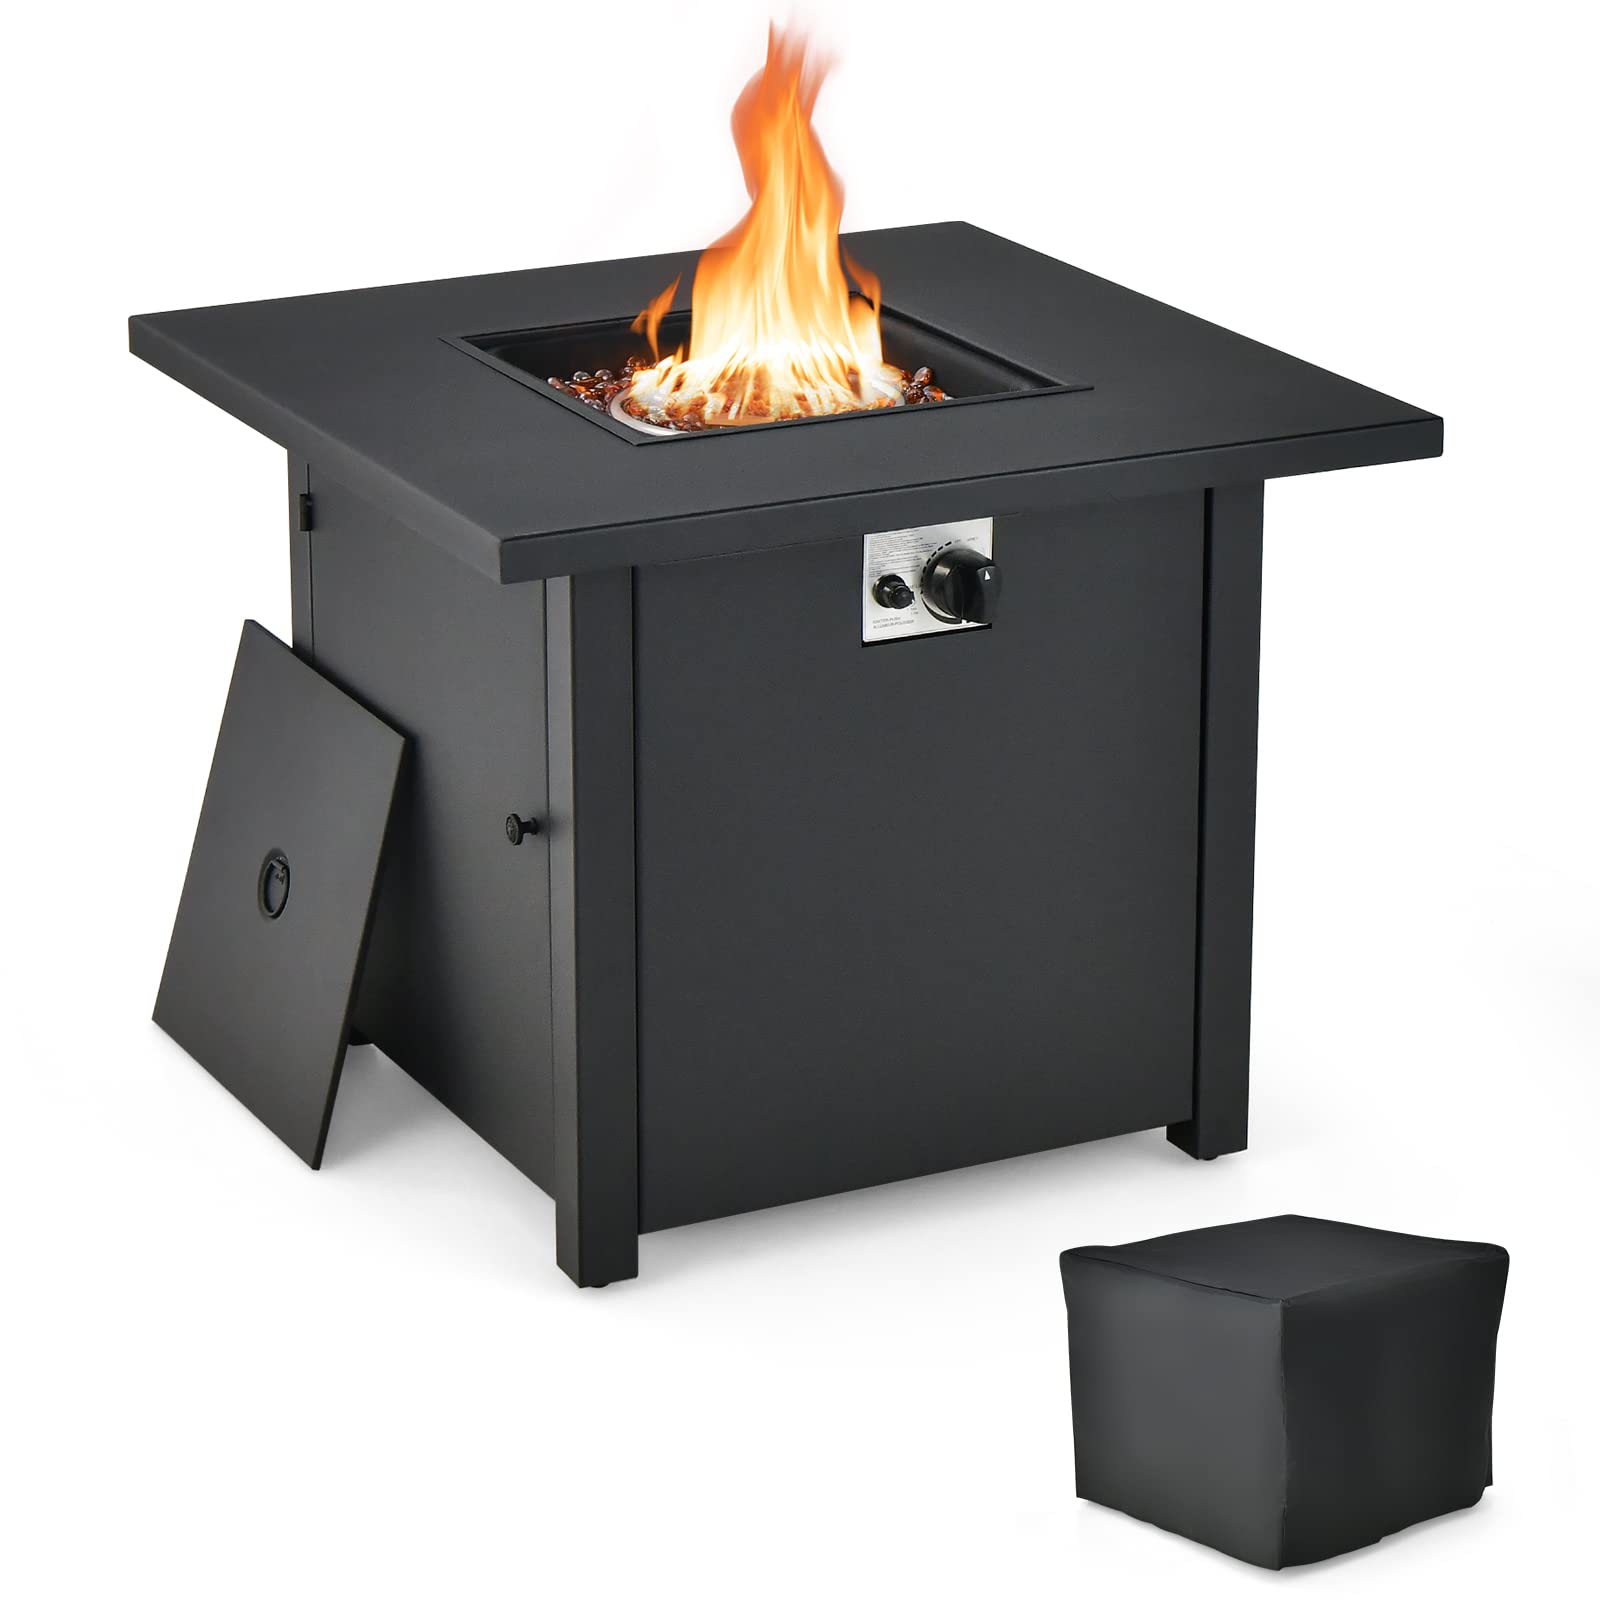 Giantex 32" Patio Propane Fire Table - 50,000 BTU Square Metal Fire Table with Lid, PVC Cover, Glass Stones